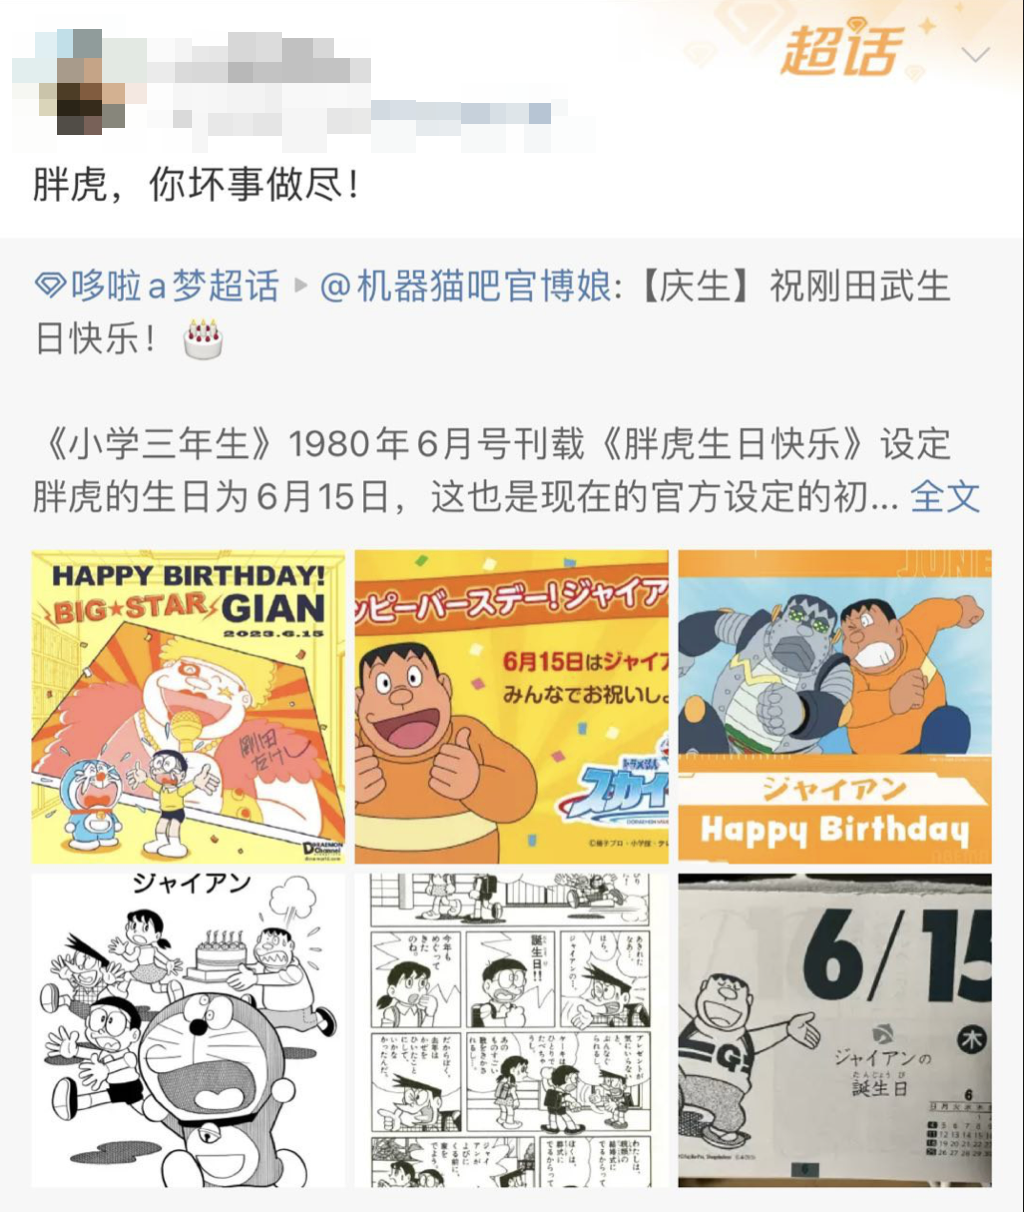 A screenshot of a Weibo post about Big G's birthday.